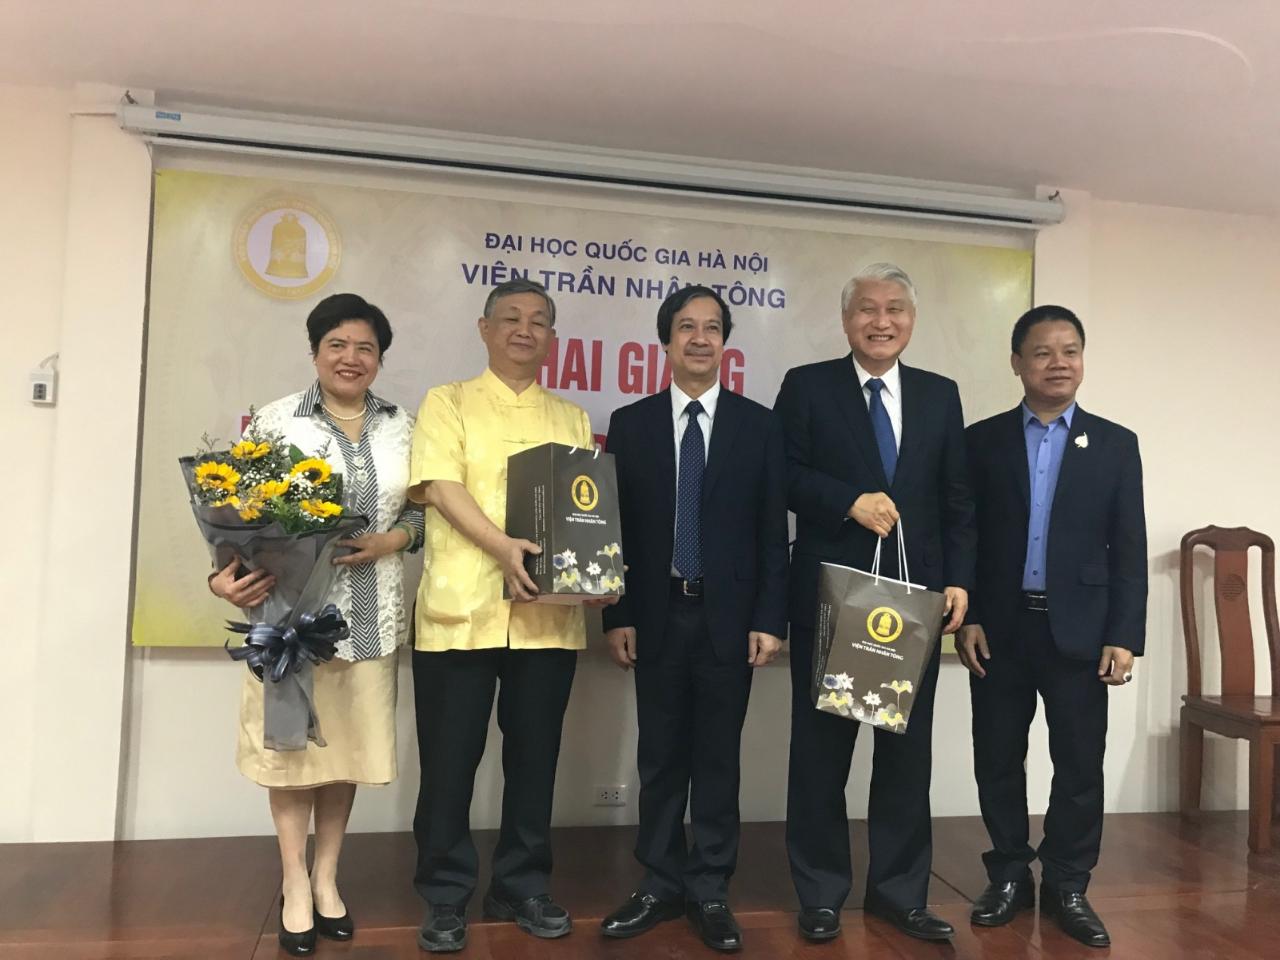 Ambassador Shih (right 2), Dr. Nguyen Kim Son, President of VNU (center), Dr. Lai Quoc Khanh, Vice President of Tran Nhan Tong Academy and Mr. and Mrs. Pan.